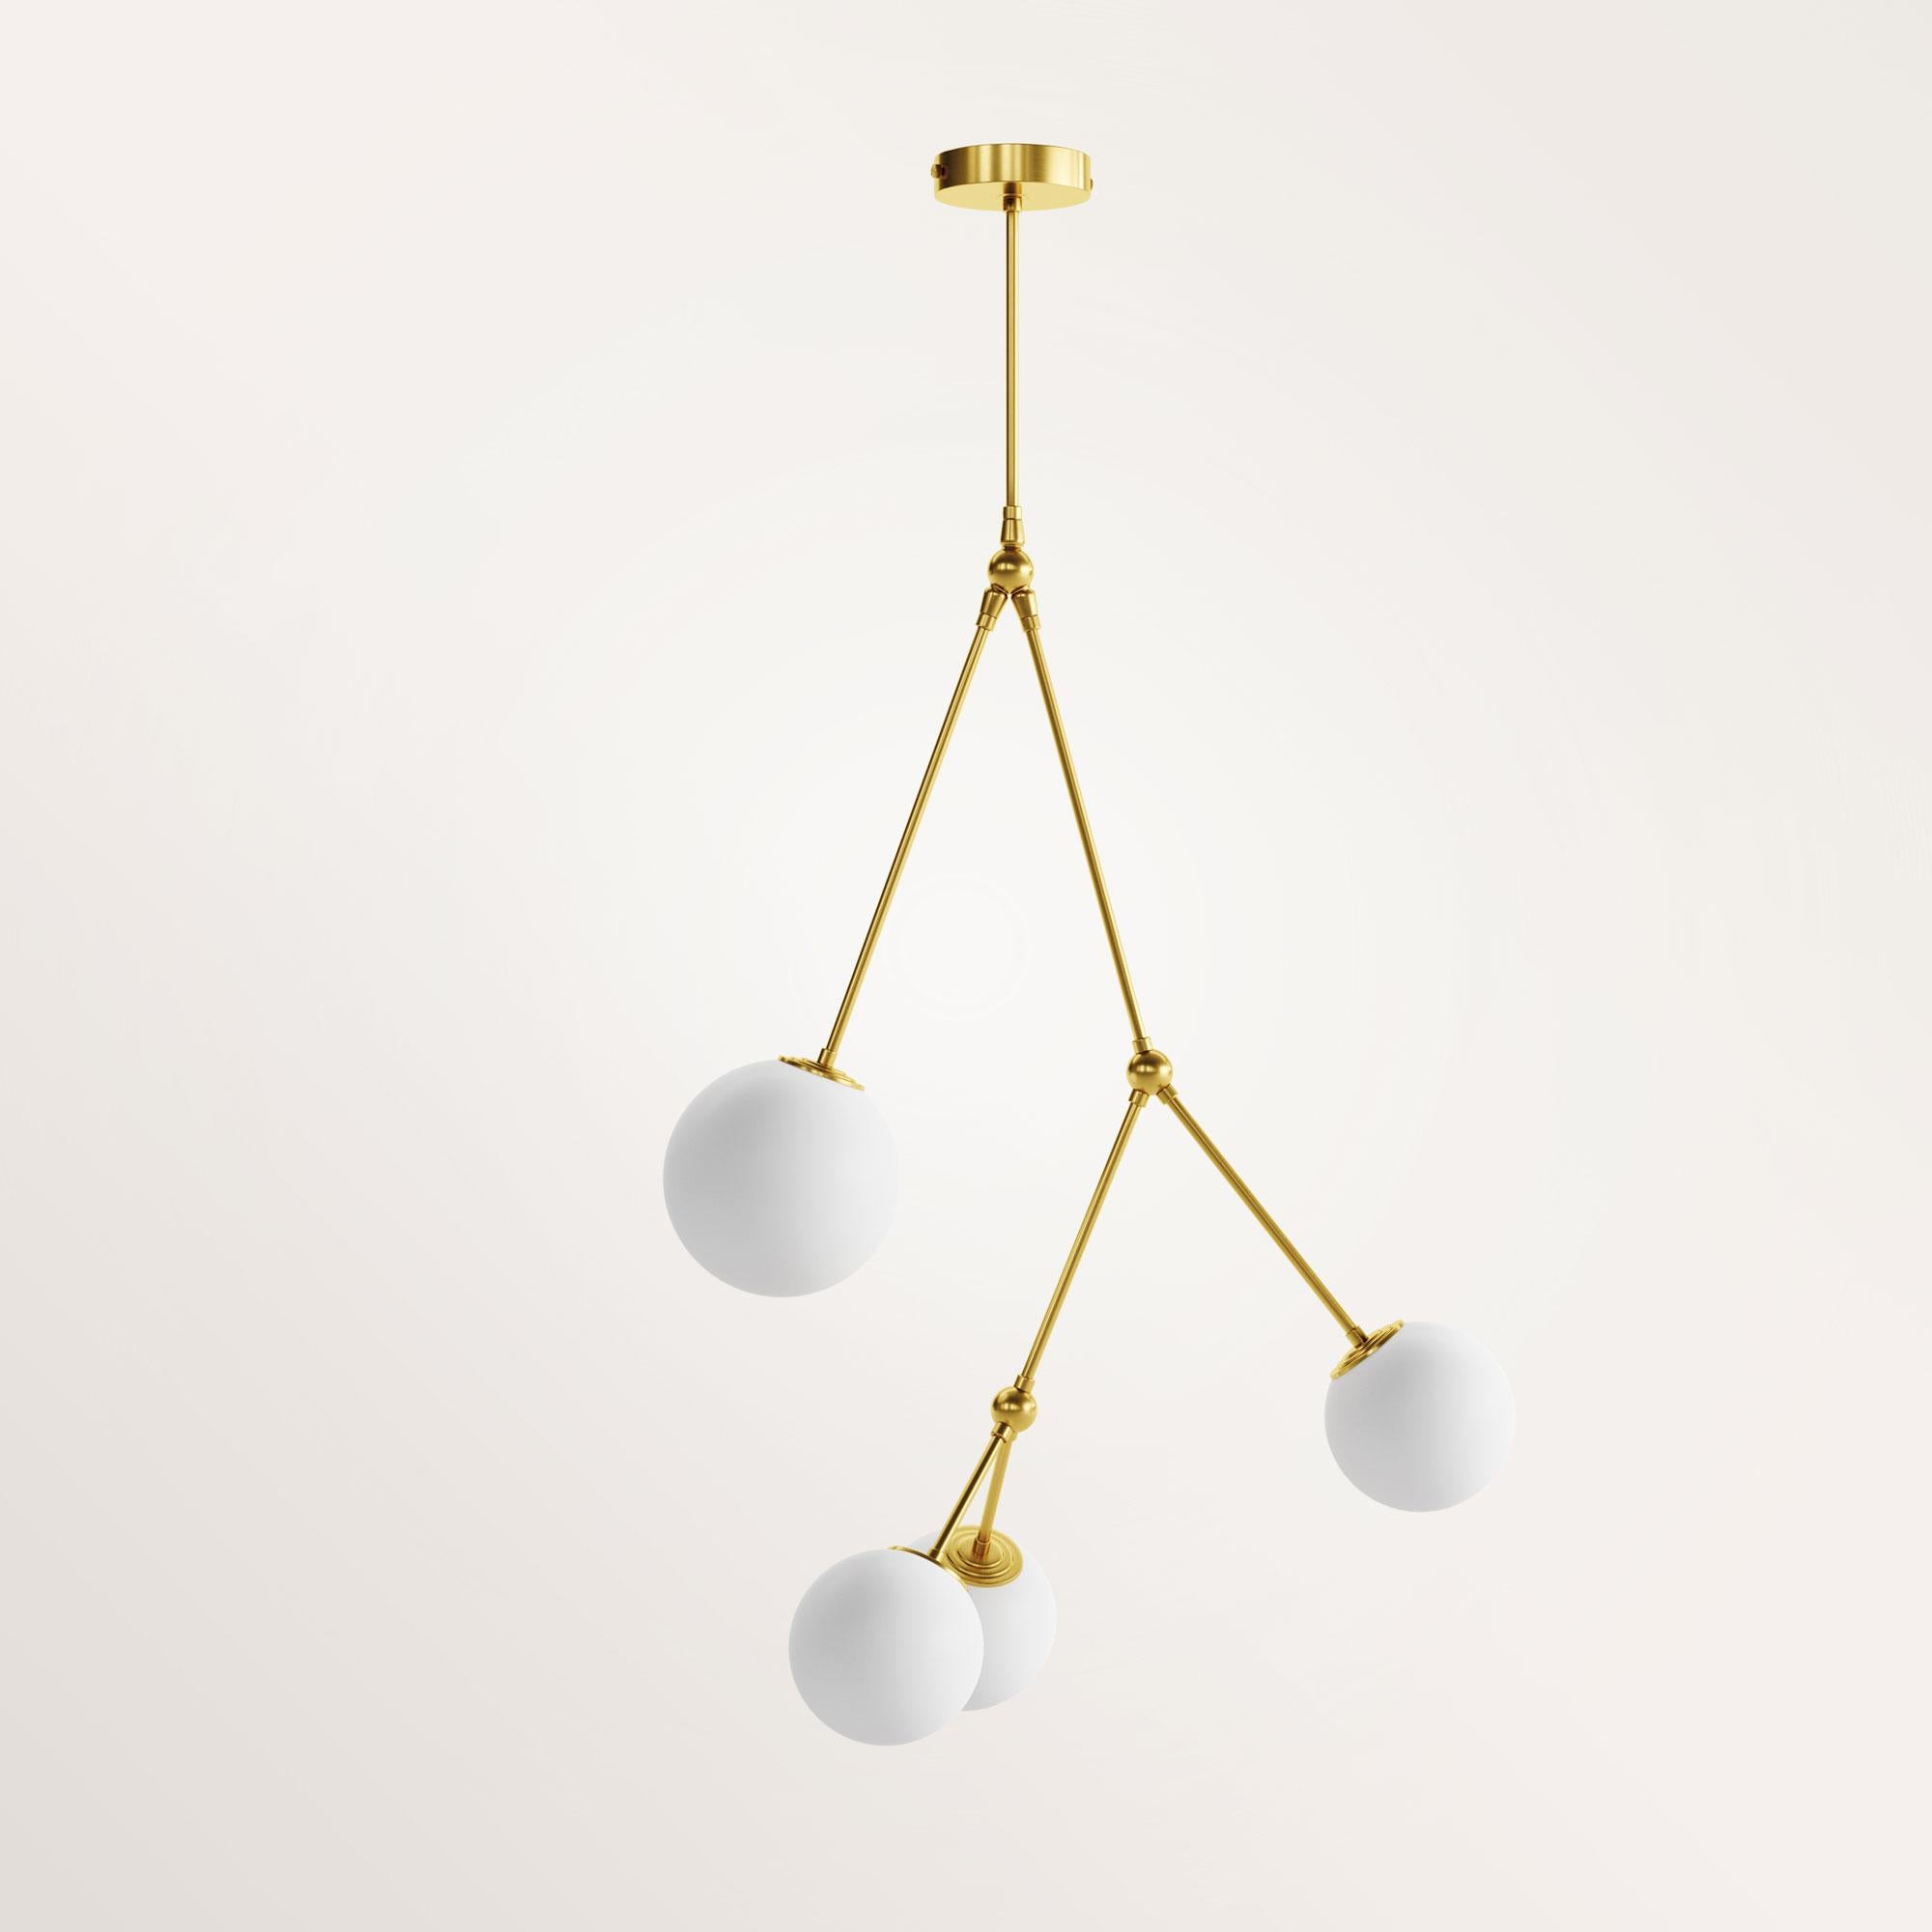 Handmade Chloris II chandelier by Gobo Lights
Dimensions: 55 L x 55 l x 100 H
Materials: Brass, opaline

The empress nymph of the flower kingdom.

Self-taught and from the world of chemistry, this Belgian craftsman / designer designs his